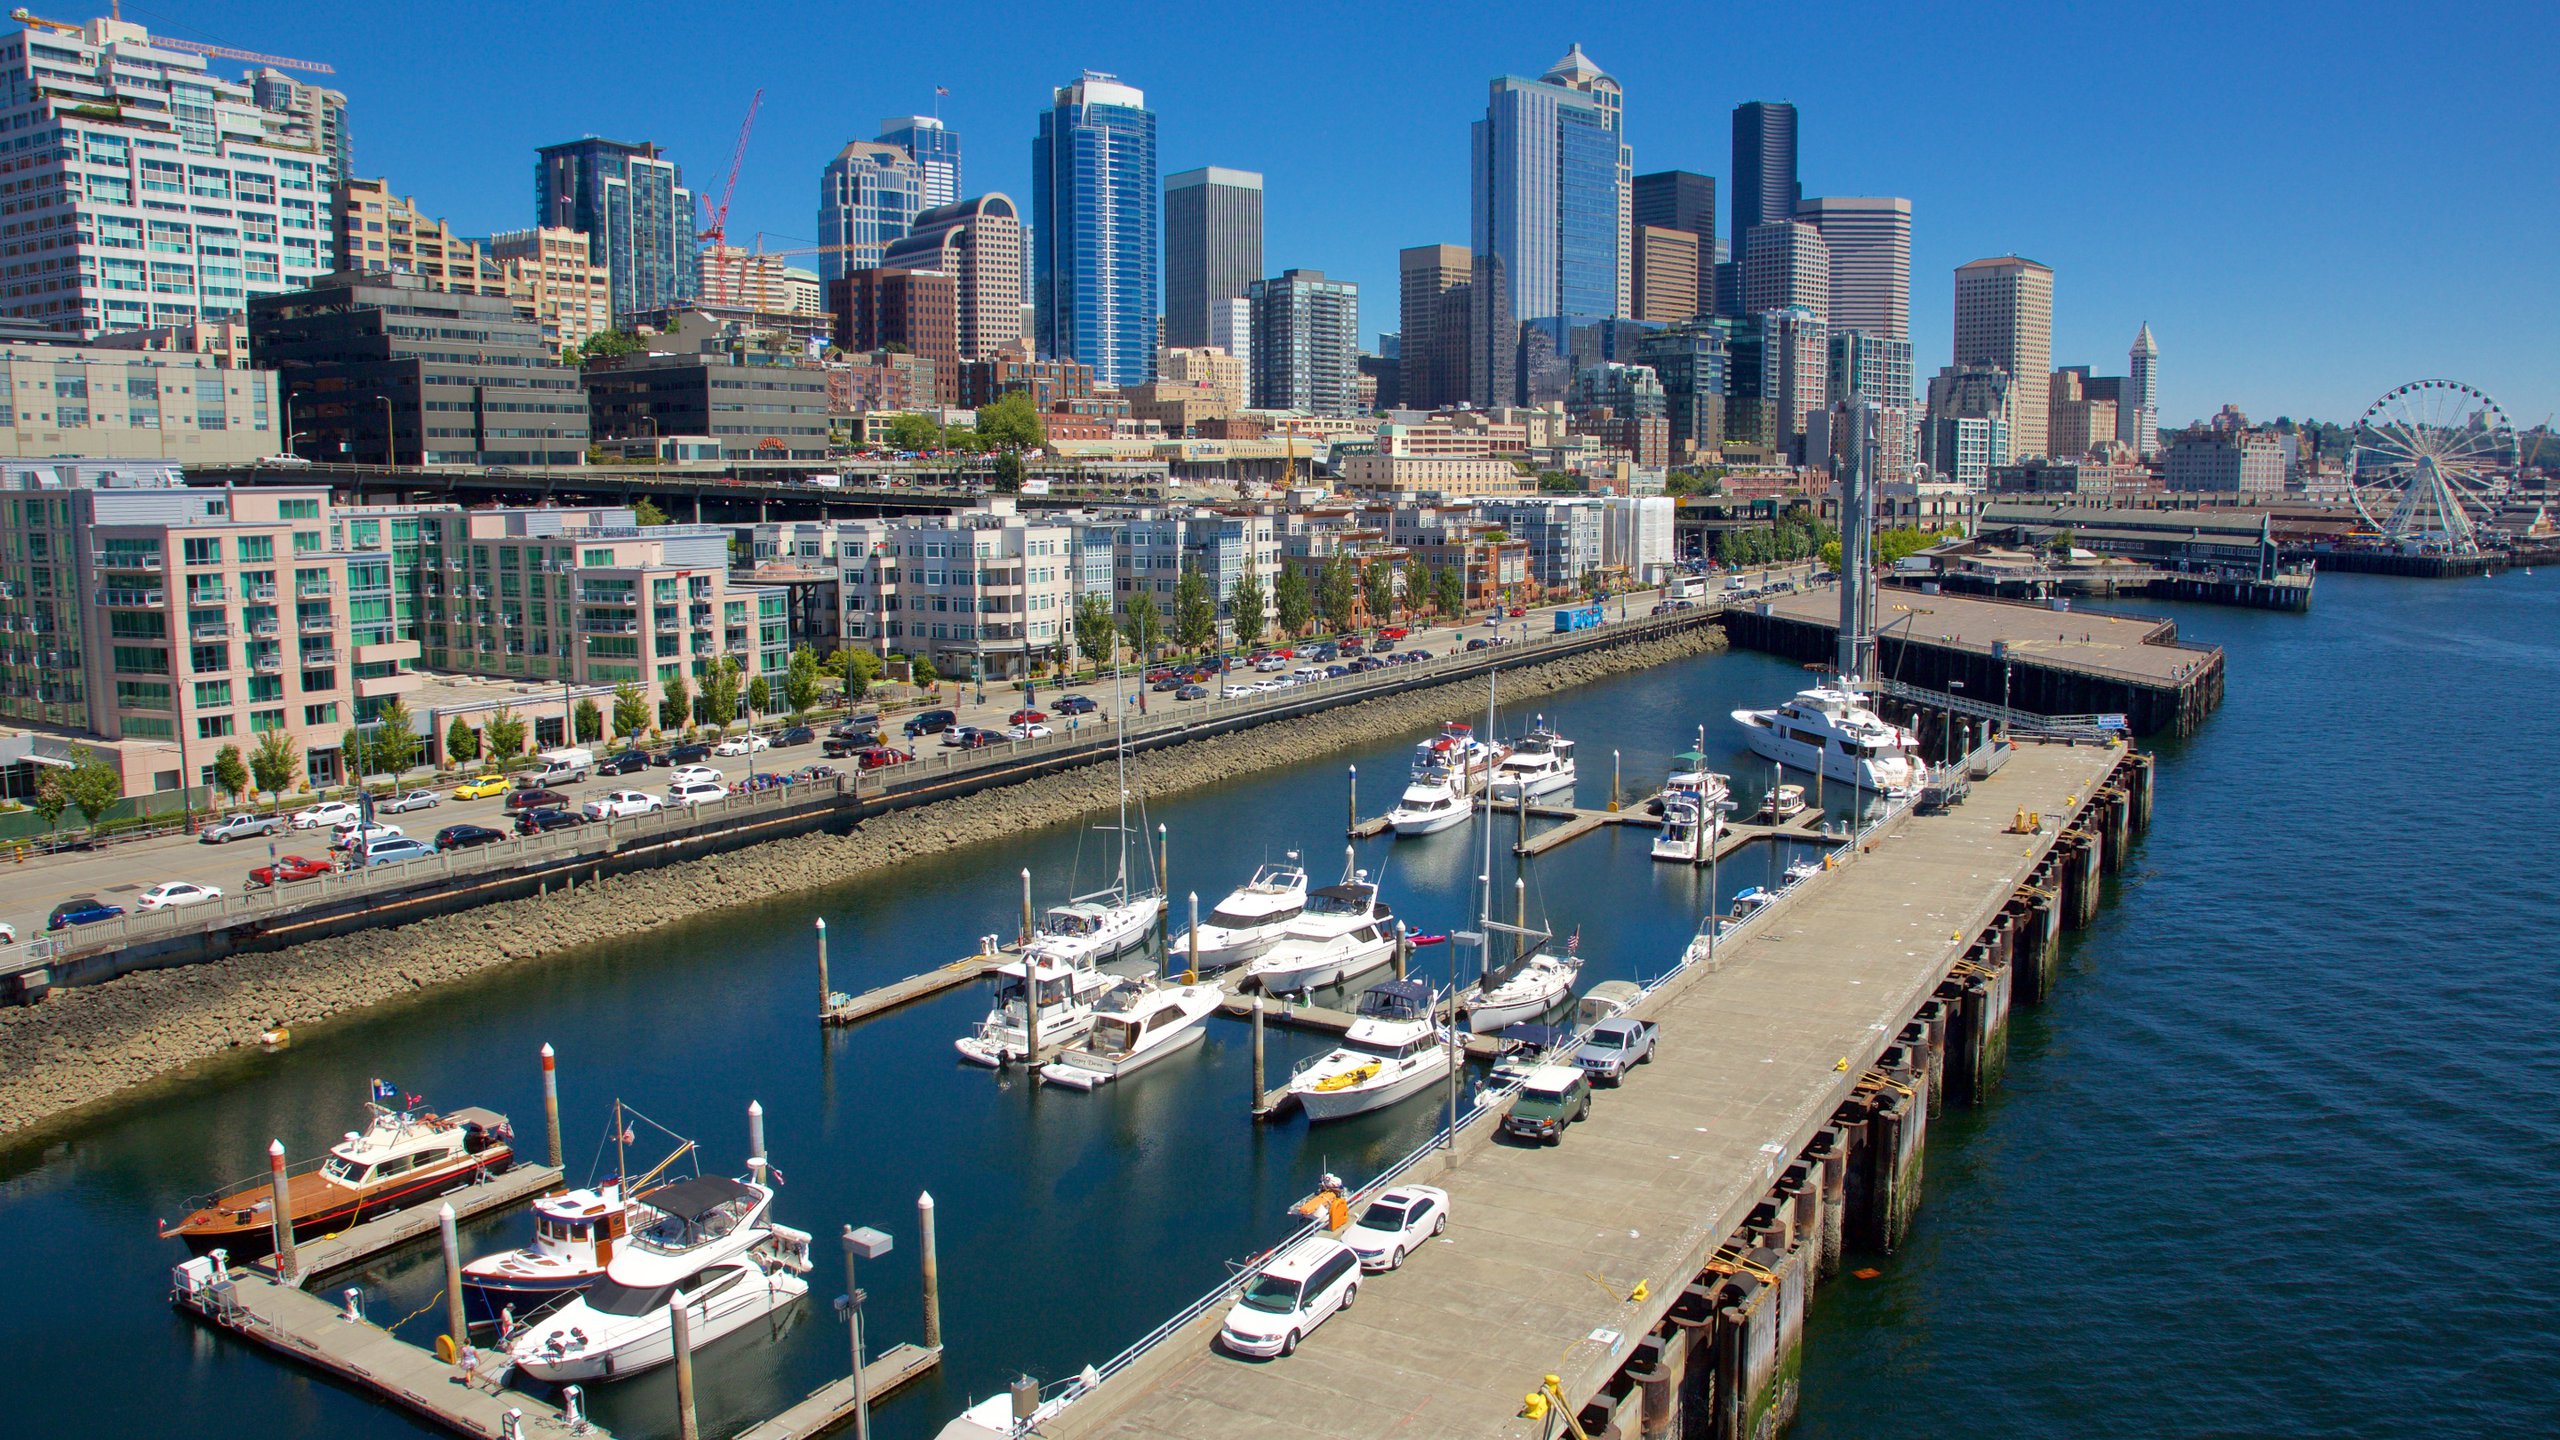 Top 20 Best Cities to Live in the USA - Seattle, Washington